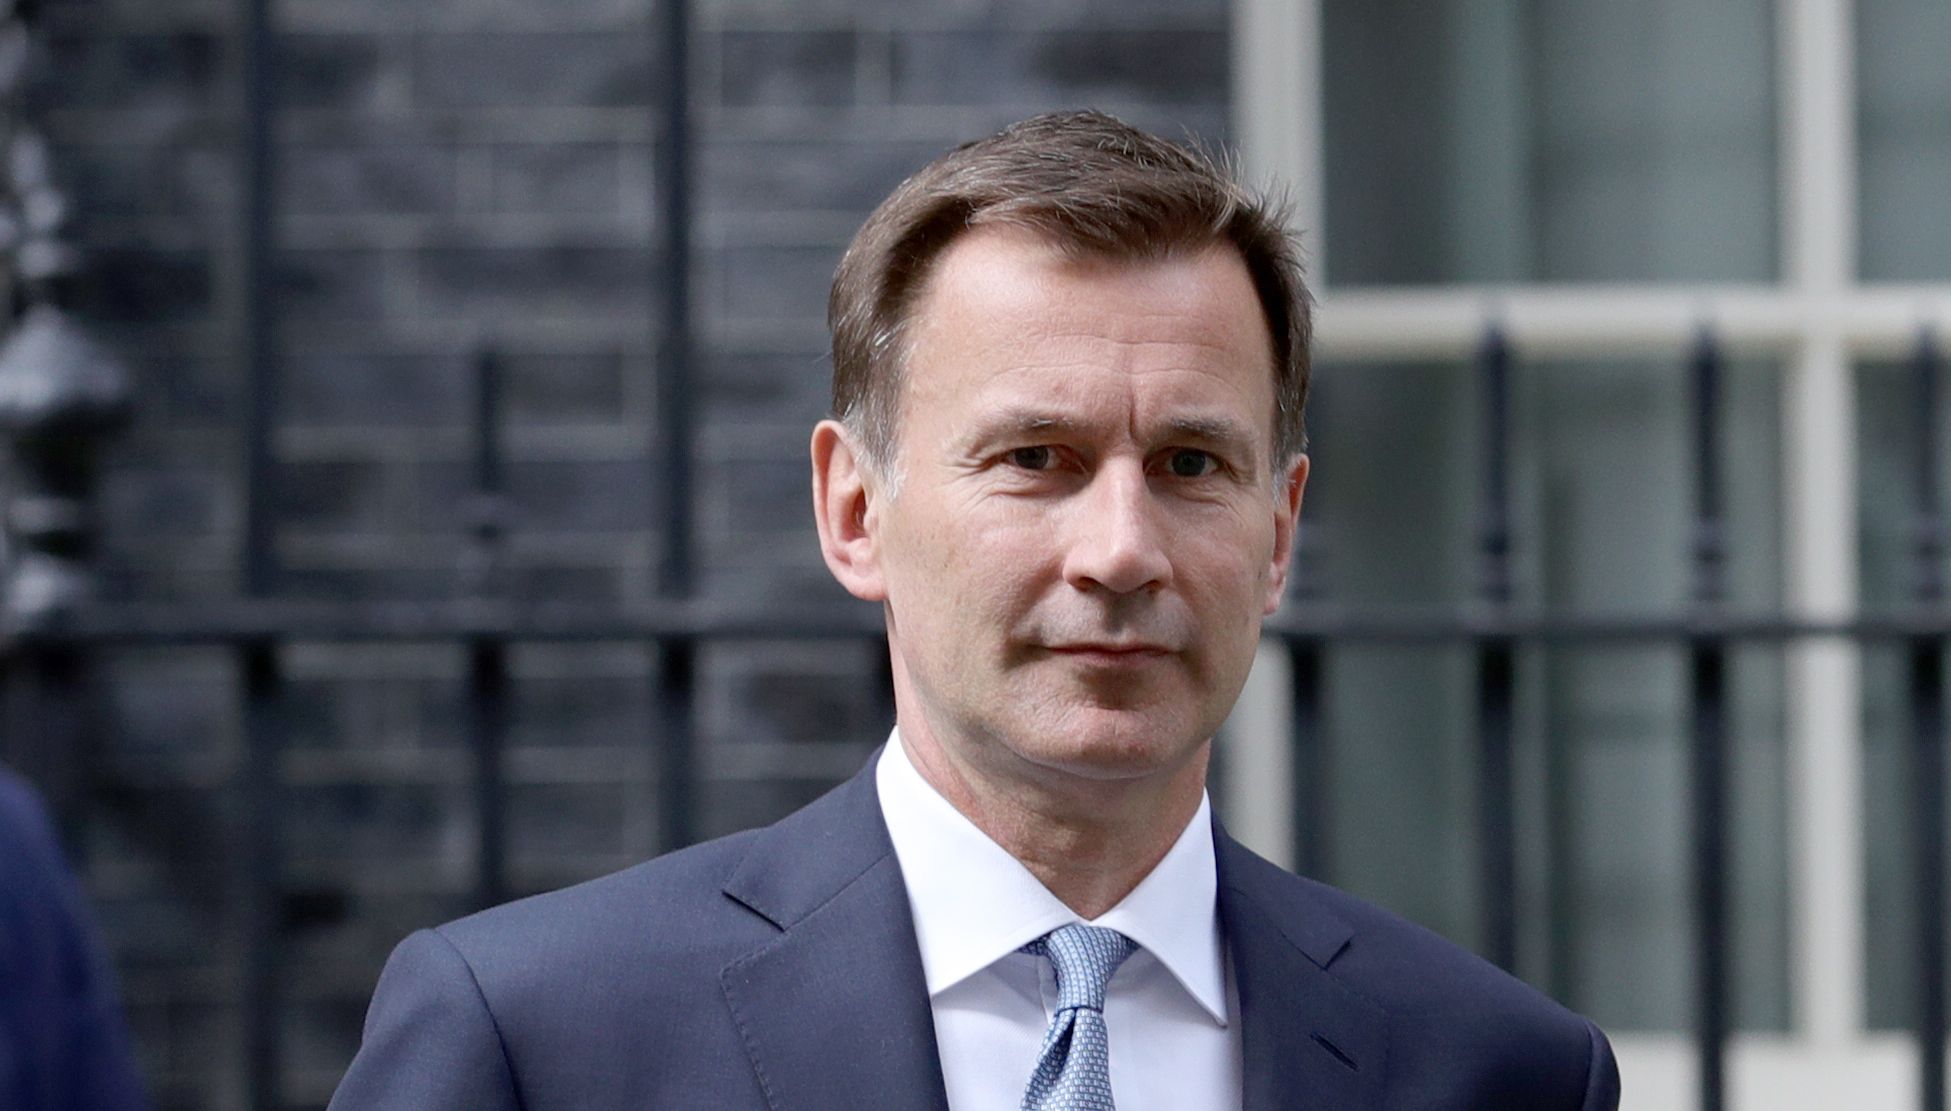 Jeremy Hunt was eliminated from the contest, failing to secure the backing of 30 MPs